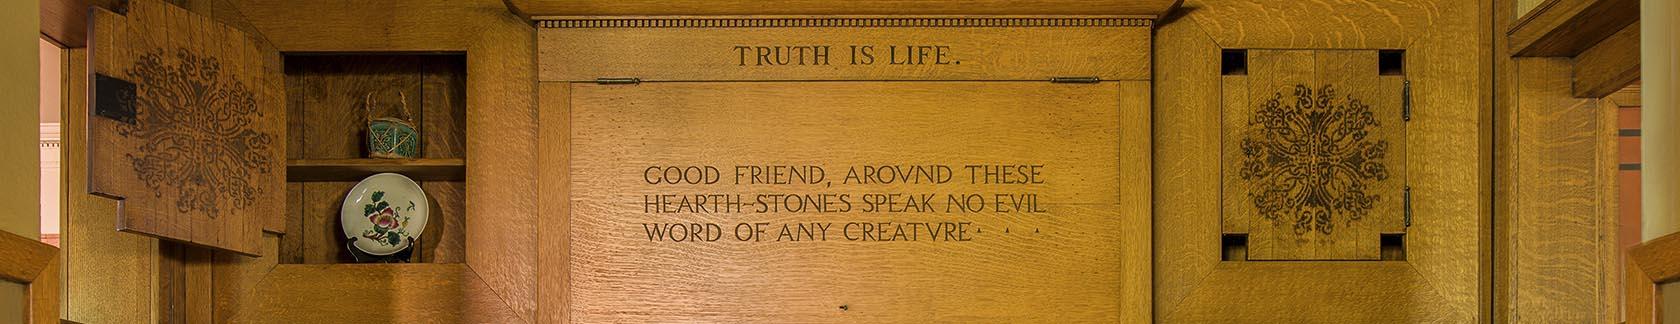 Truth is Life. 